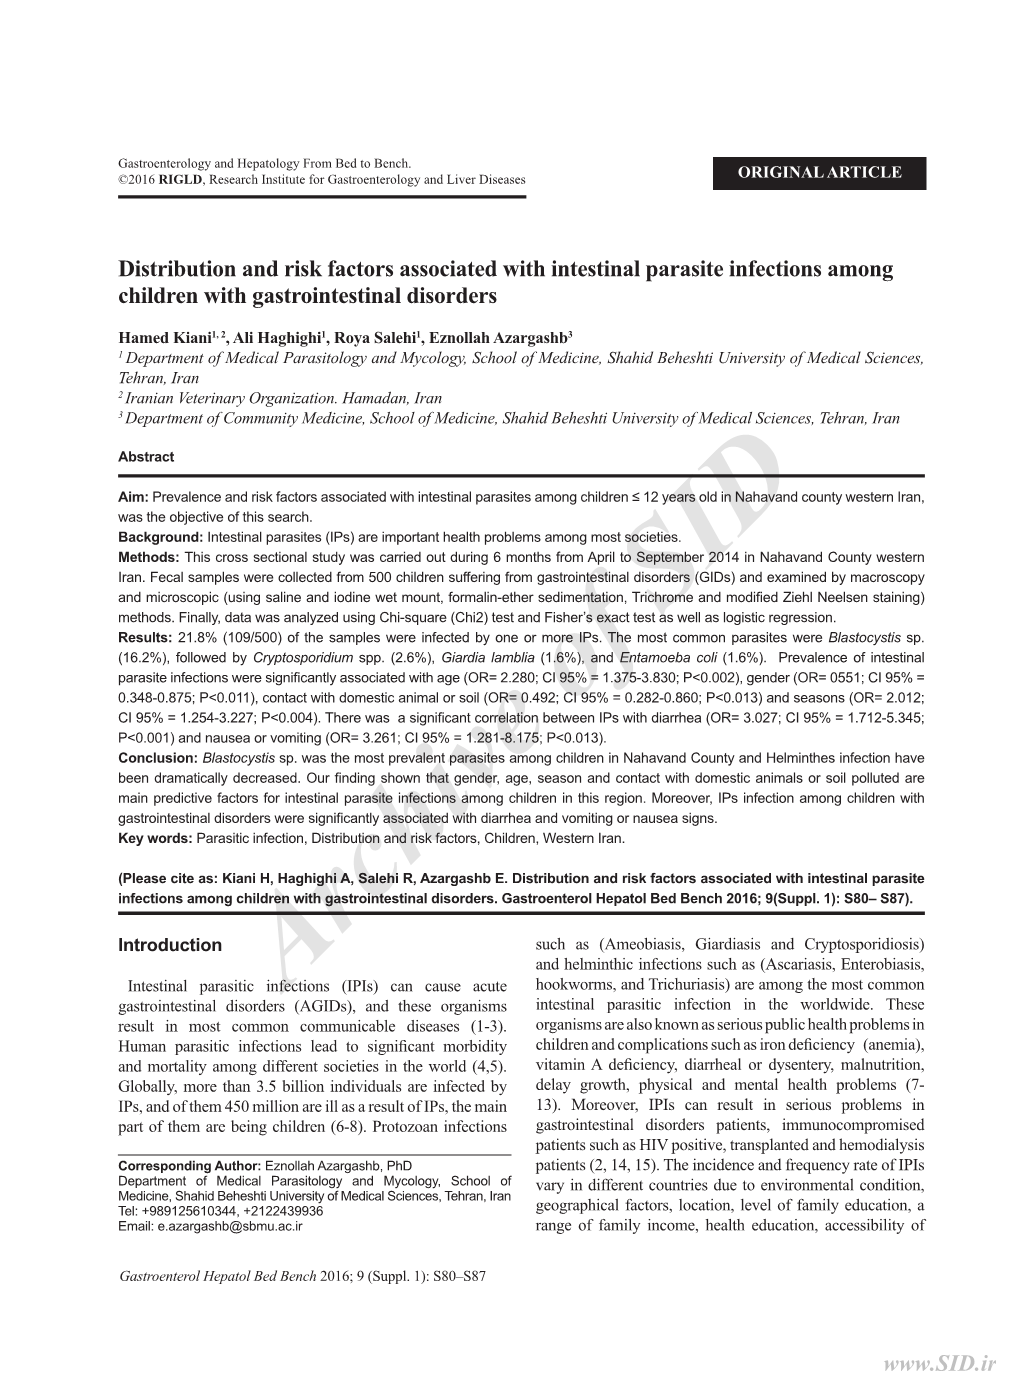 Distribution and Risk Factors Associated with Intestinal Parasite Infections Among Children with Gastrointestinal Disorders